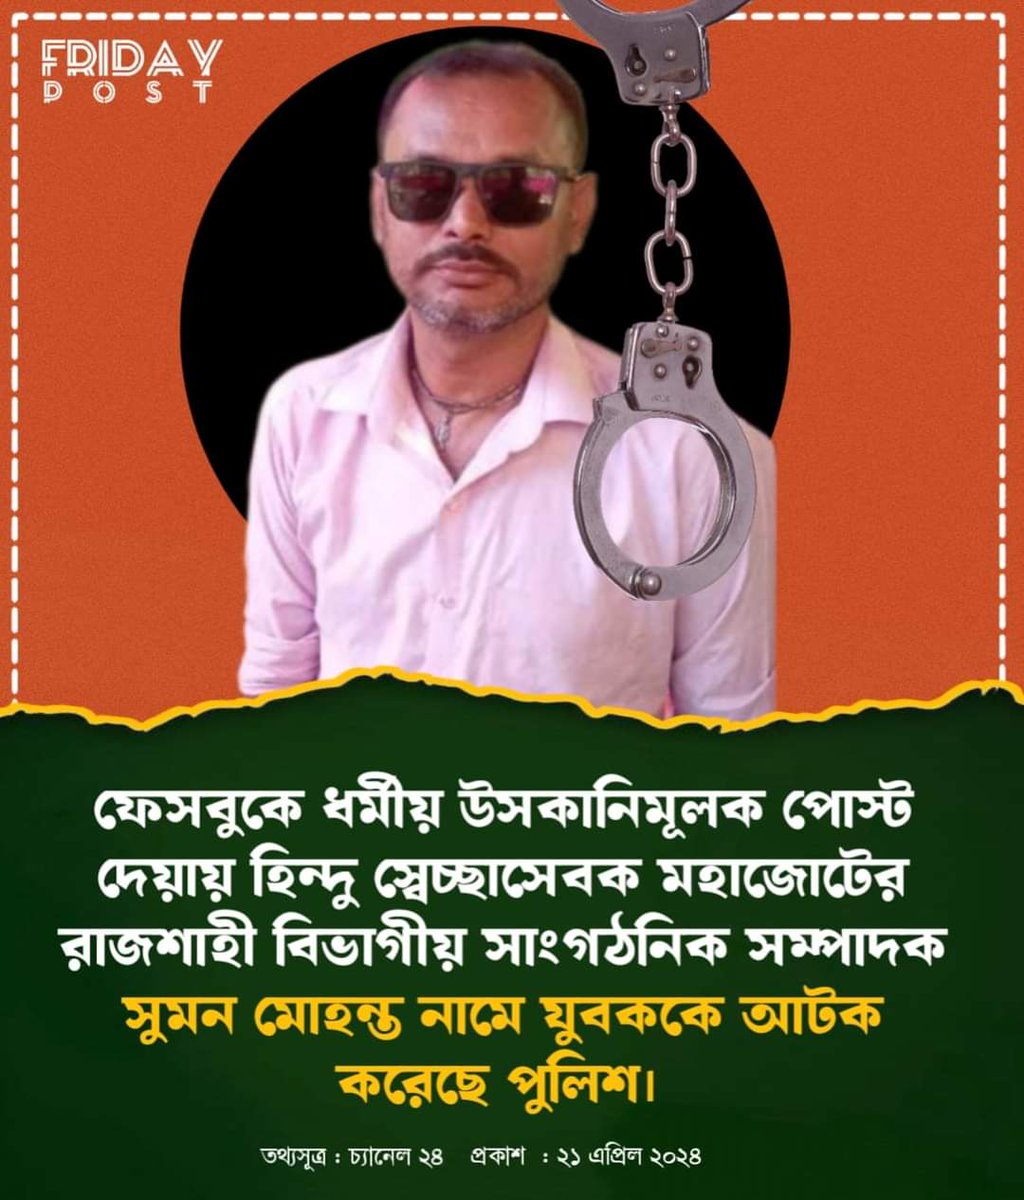 The person who hailed the murders of the Muslim victims, Rajshahi's leader of Hindu Mahajot, in Faridpur has been arrested by the Police. He's just the tip of the ice berg. Bangladesh has been infected by such viruses courtesy of the neighbours. 

#IndiaOut 
#BoycottIndia